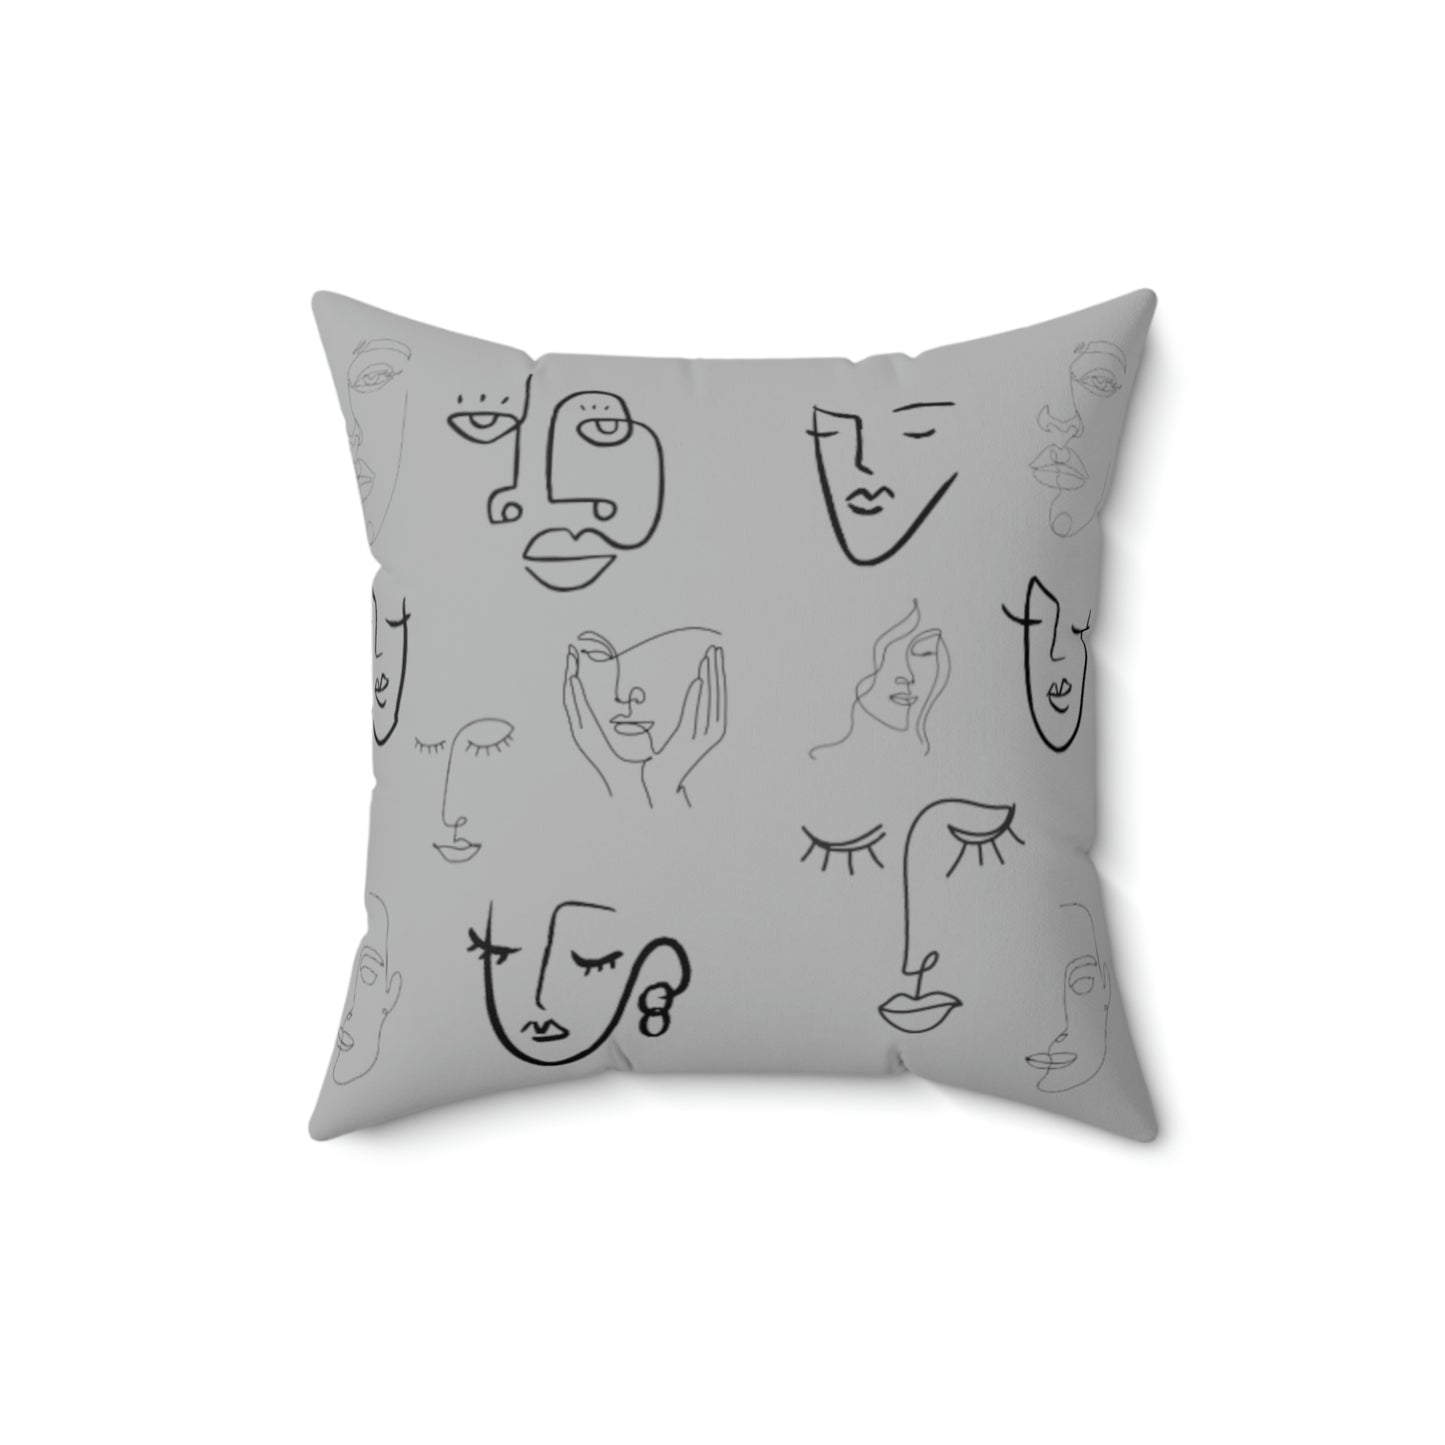 Many Faces grey - Spun Polyester Square Pillow